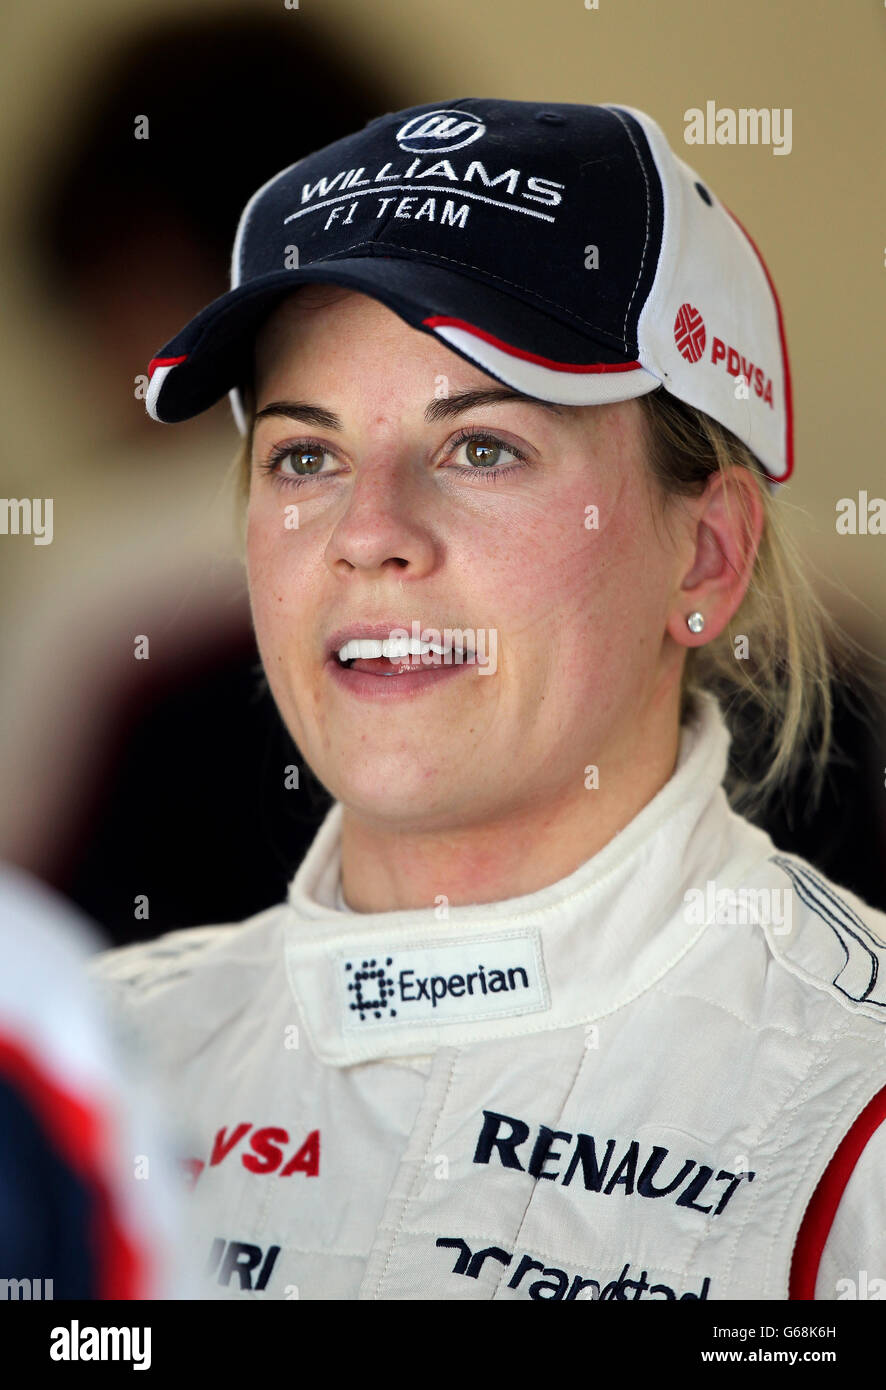 Susie Wolff during day three of the Formula One young driver tests at Silverstone, Northampton. PRESS ASSOCIATION Photo. Picture date: Friday July 19, 2013. See PA Story AUTO Silverstone. Photo credit should read: David Davies/PA Wire. RESTRICTIONS: Use subject to restrictions. Editorial use in print media and internet only. No mobile or TV. Commercial use with prior consent. Stock Photo